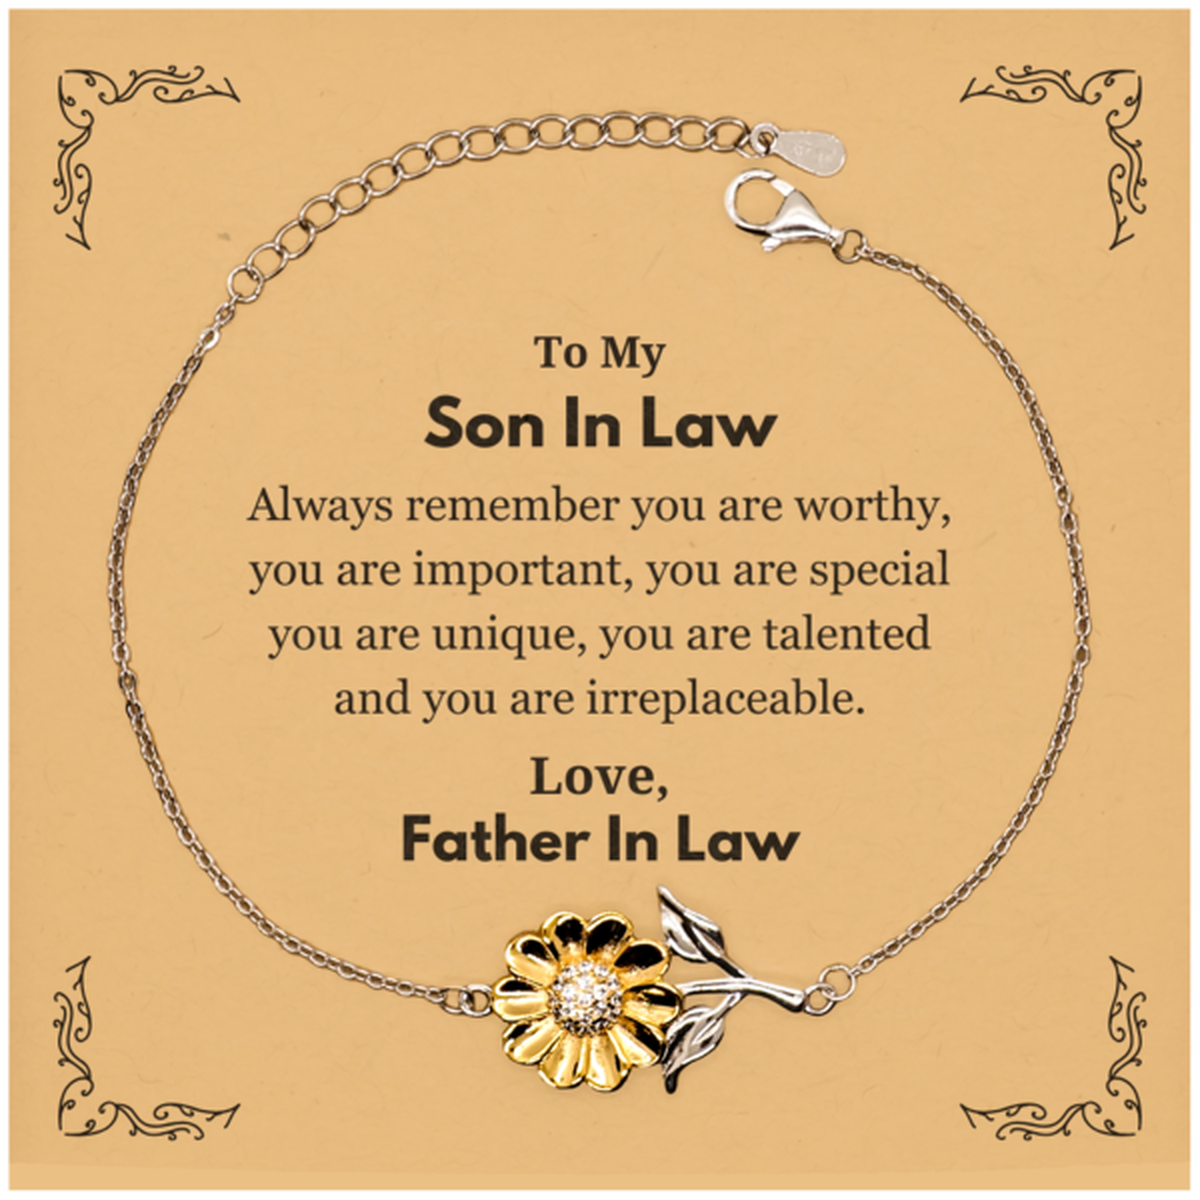 Son In Law Birthday Gifts from Father In Law, Inspirational Sunflower Bracelet for Son In Law Christmas Graduation Gifts for Son In Law Always remember you are worthy, you are important. Love, Father In Law